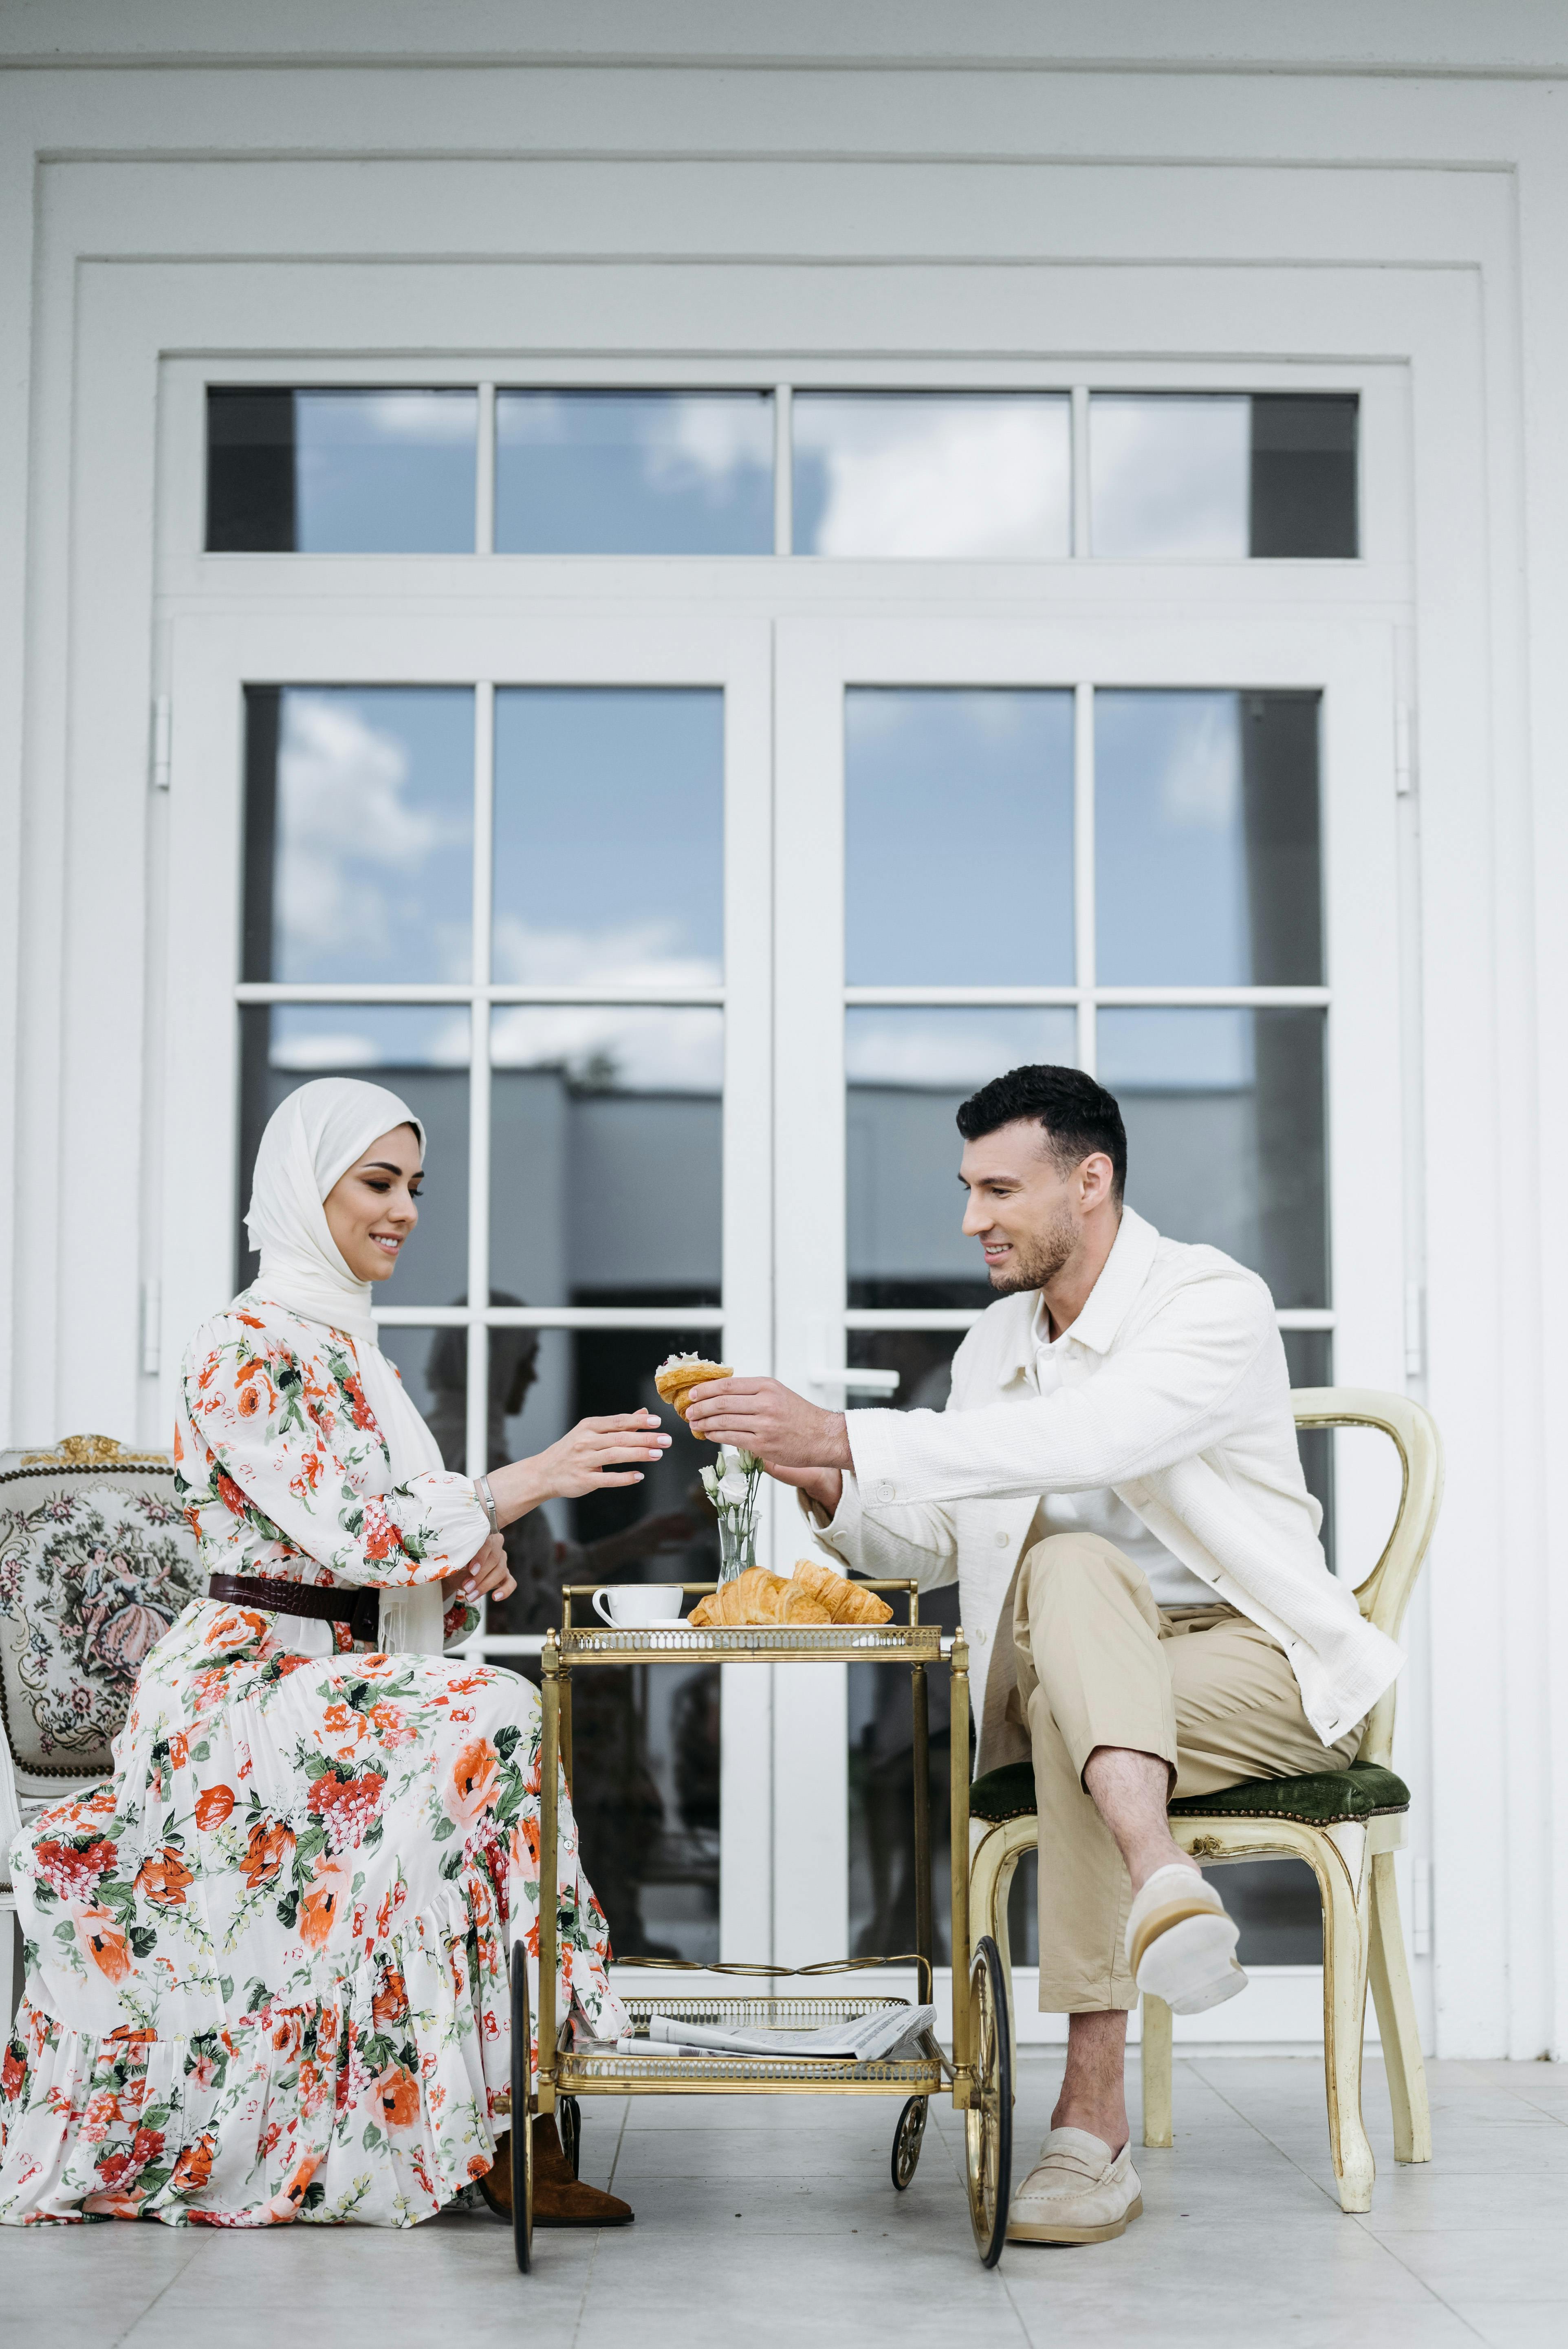 man in white dress shirt and woman in floral maxi dress sitting in the patio having breakfast